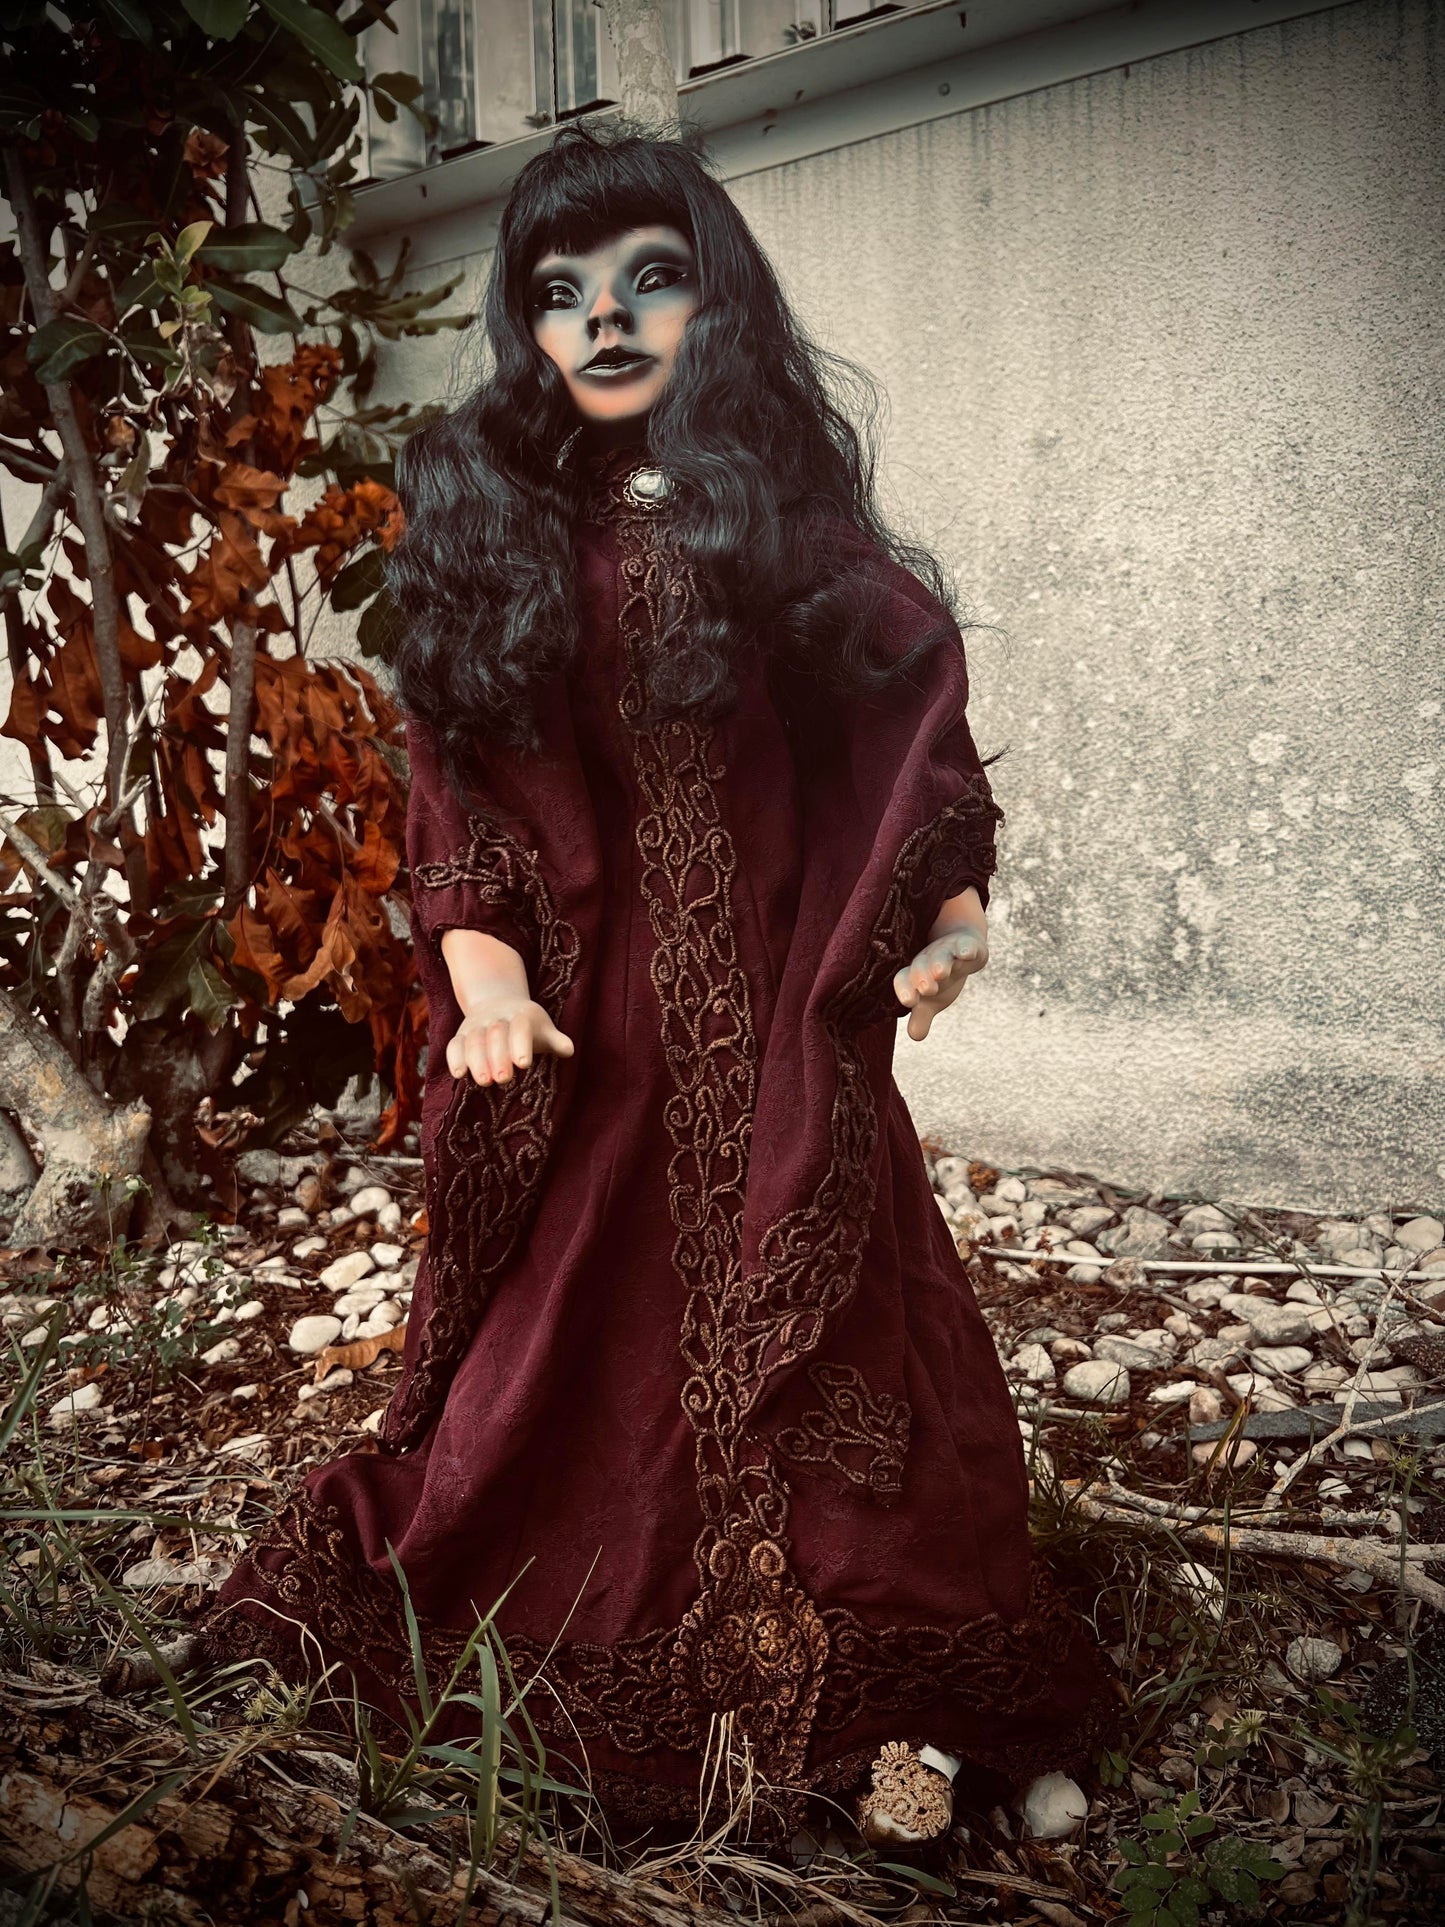 Meet Ophelia 28" Doll Porcelain Witchy Creepy Haunted Spirit Infected Scary Poltergeist Spooky Wicca Possessed Fall Gothic Positive Energy